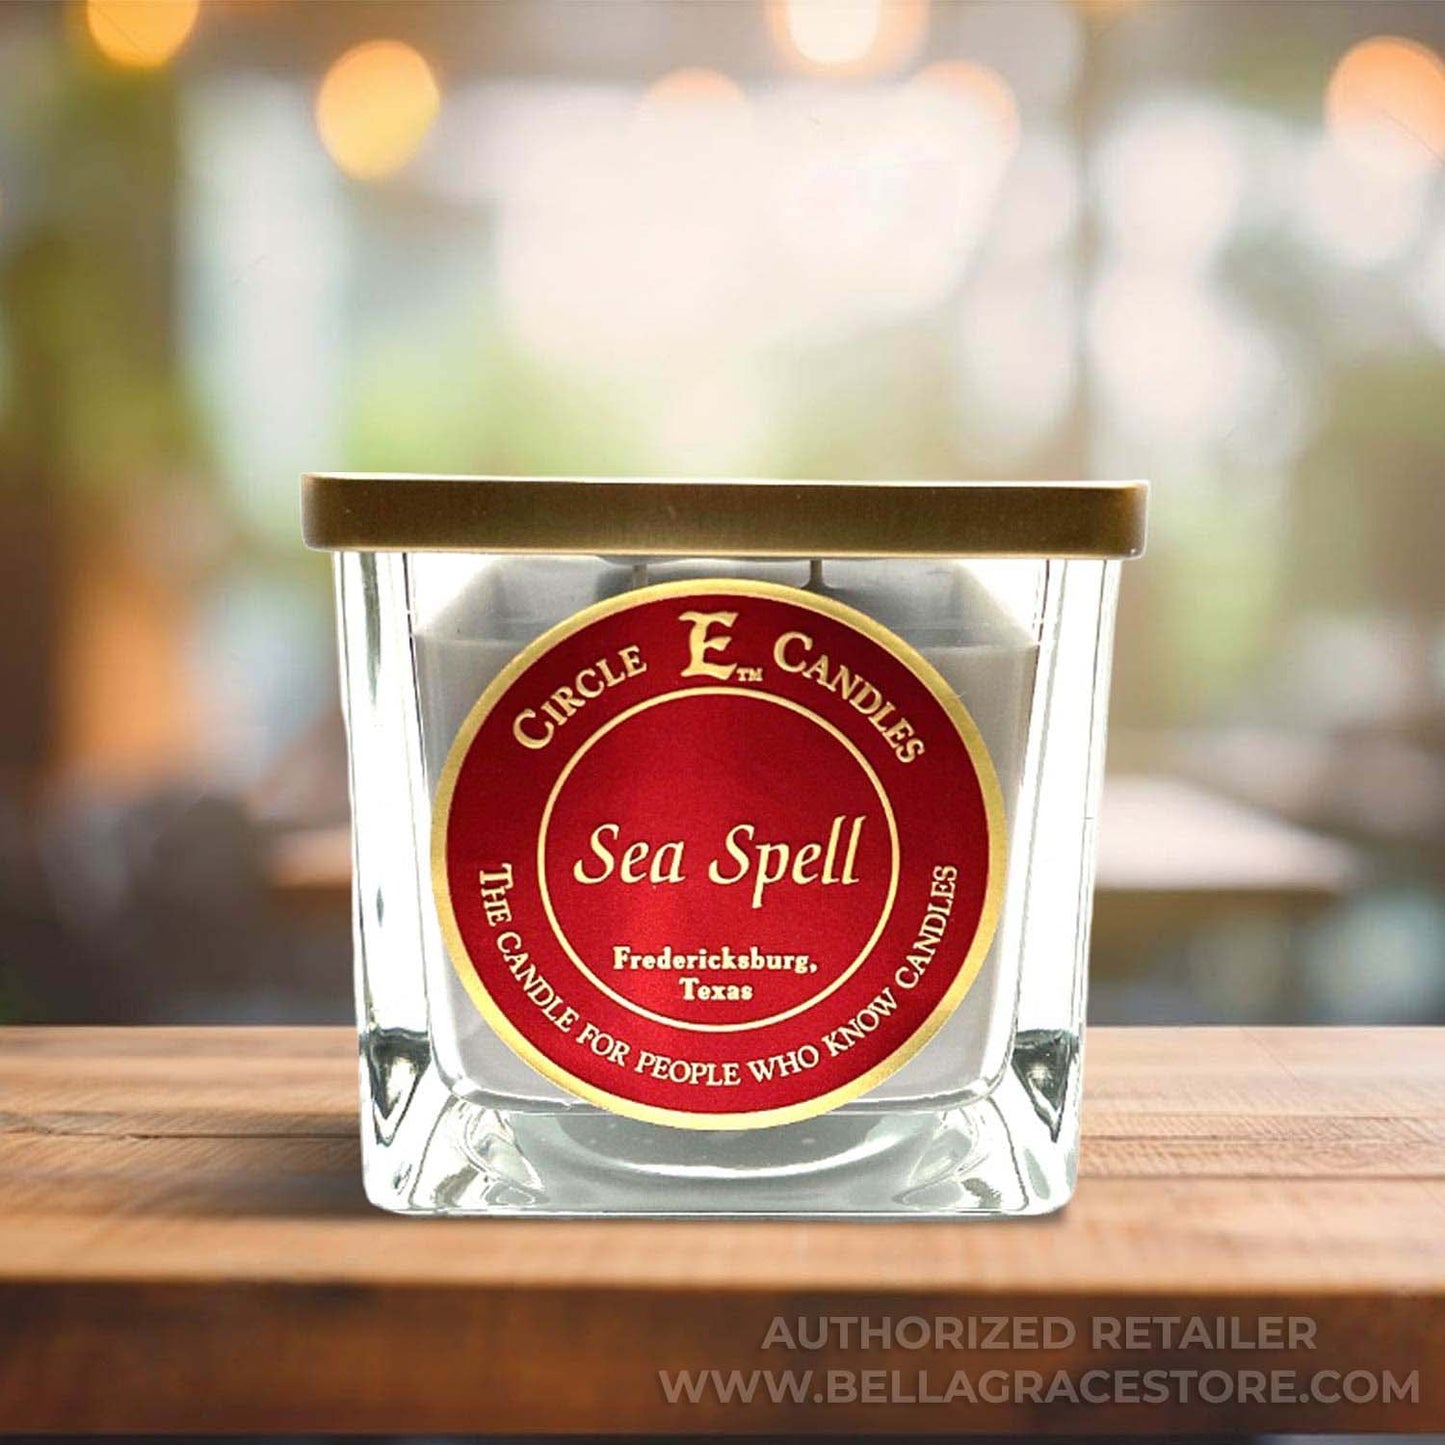 Circle E Candles, Sea Spell Scent, Small Size Jar Candle, 8oz, 1 Wick